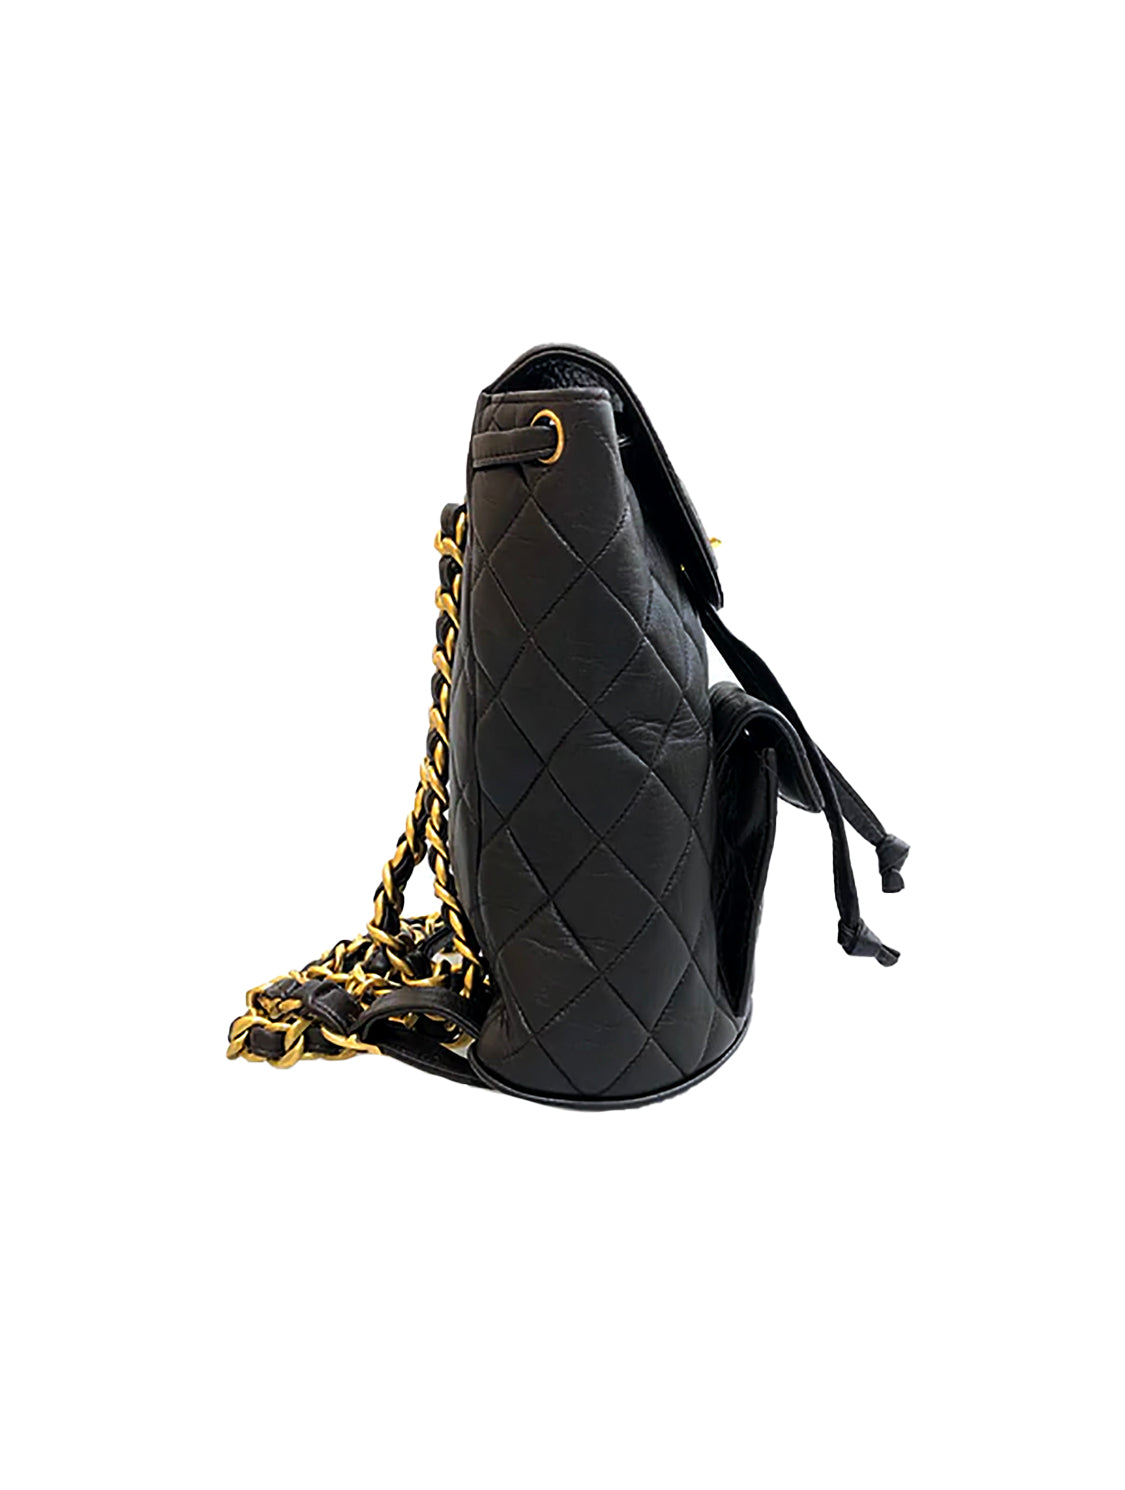 CHANEL Caviar Quilted Business Affinity Backpack Black 206040